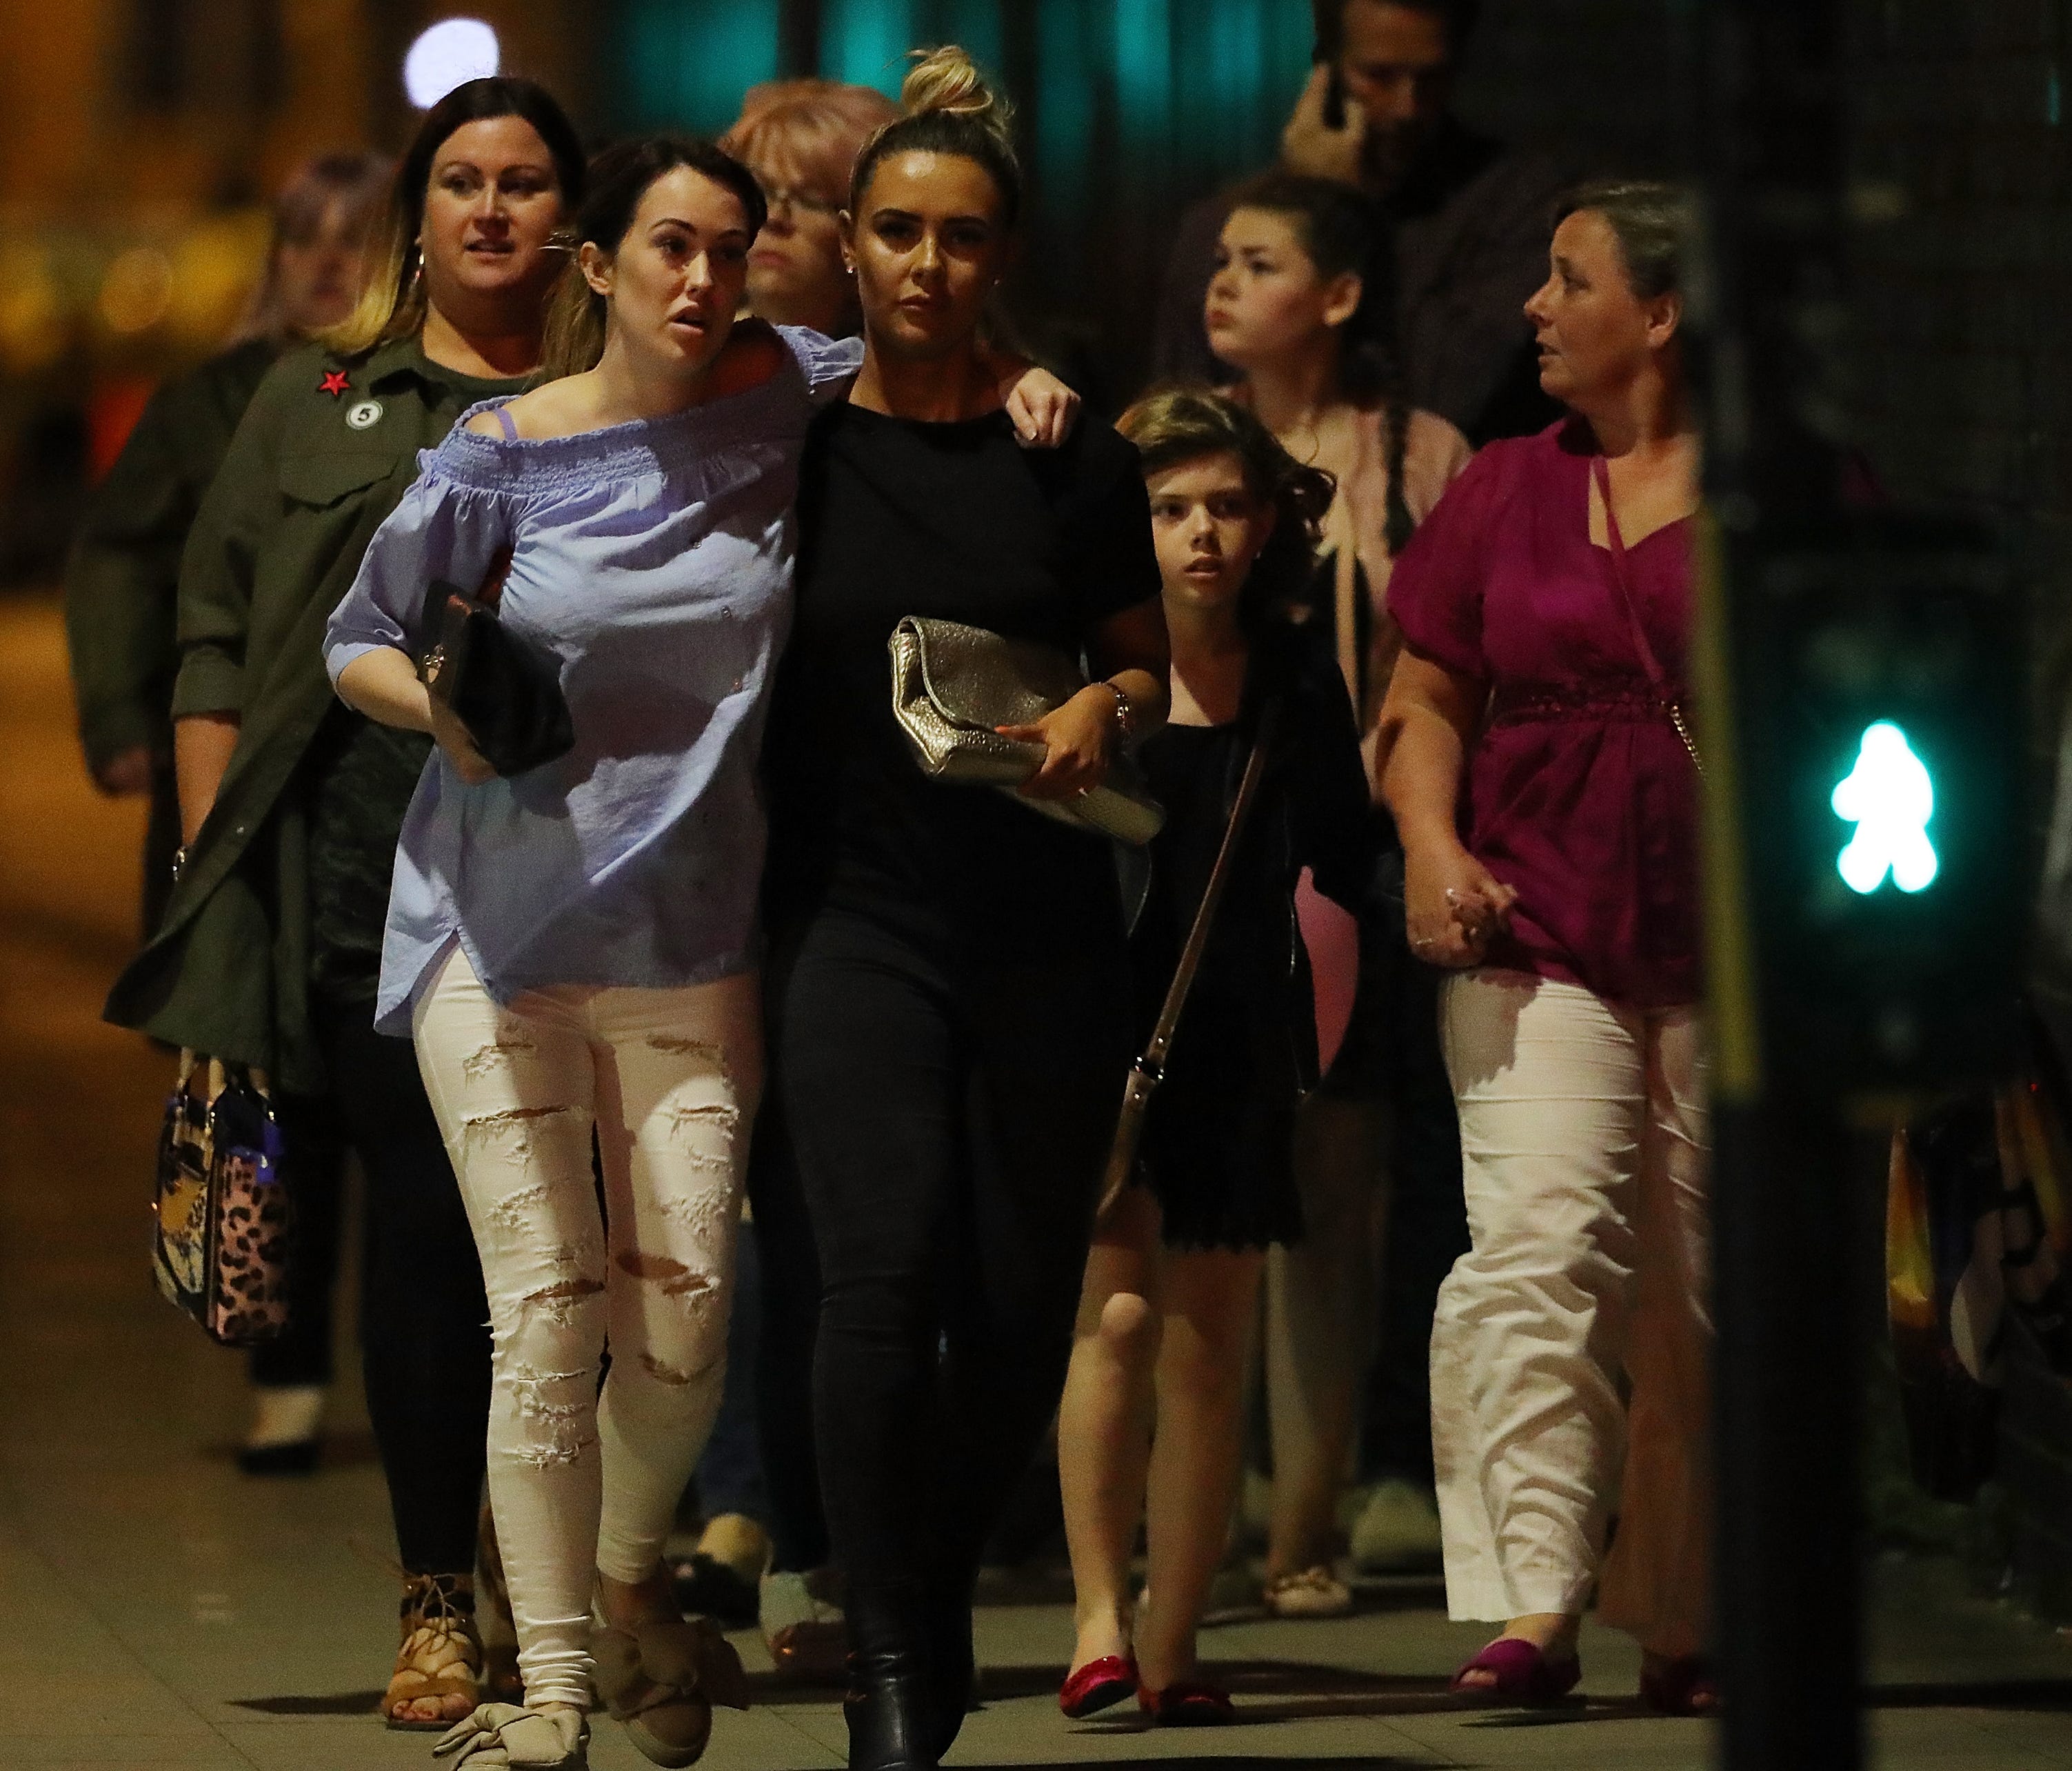 Police escort members of the public from the Manchester Arena on May 23, 2017 in Manchester, England.